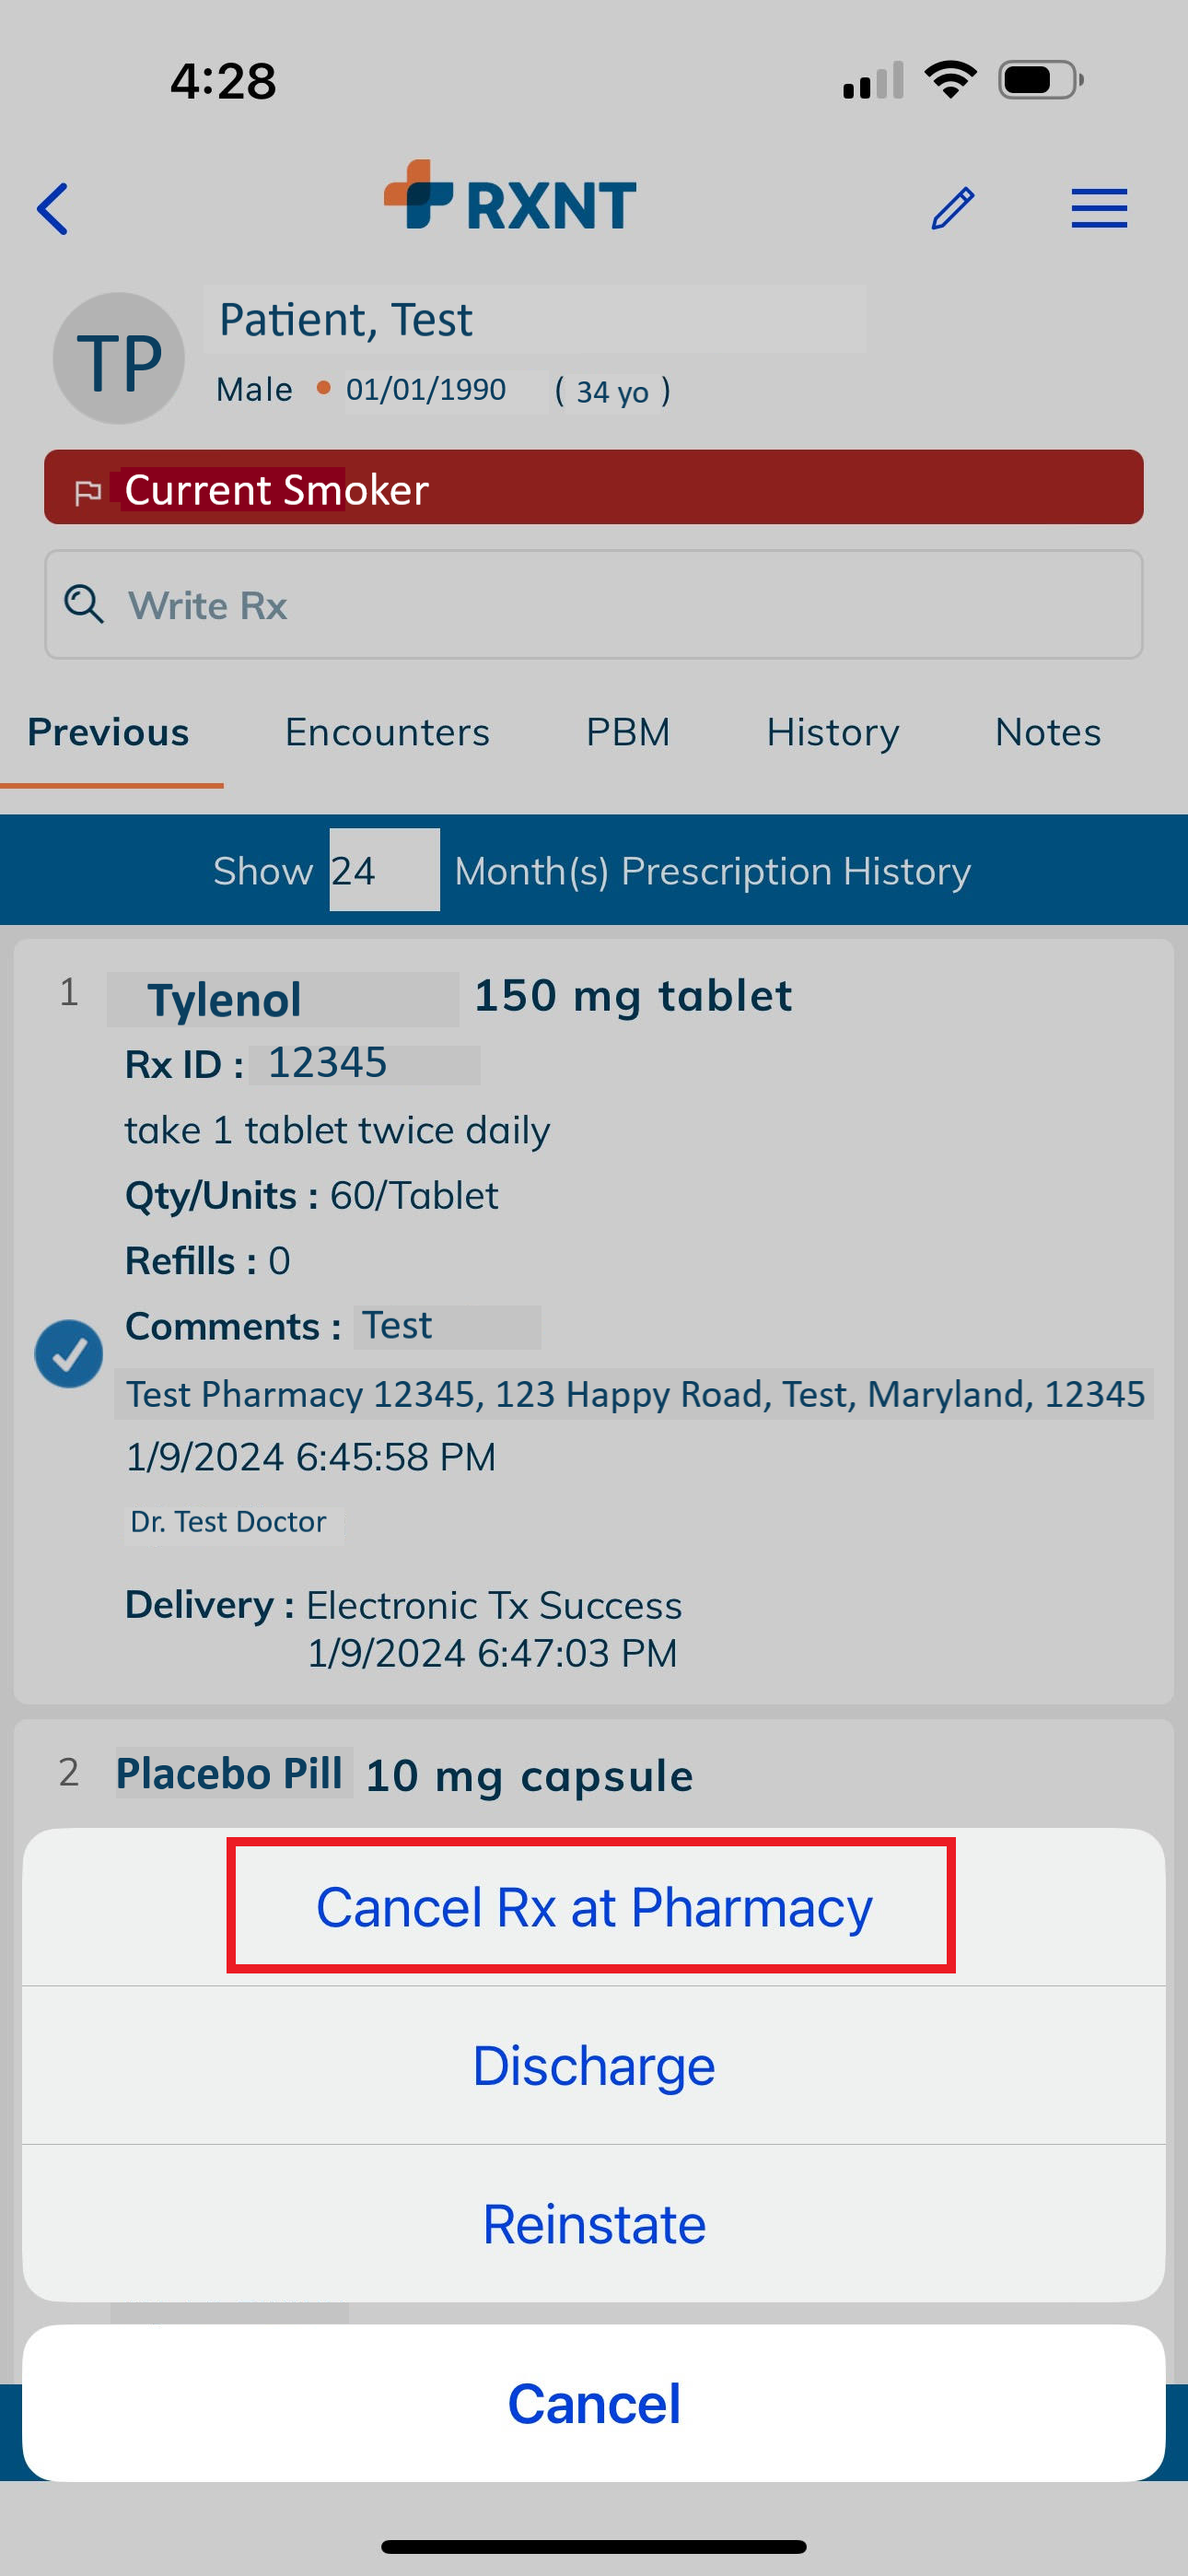 Cancel at Pharmacy Outline.png